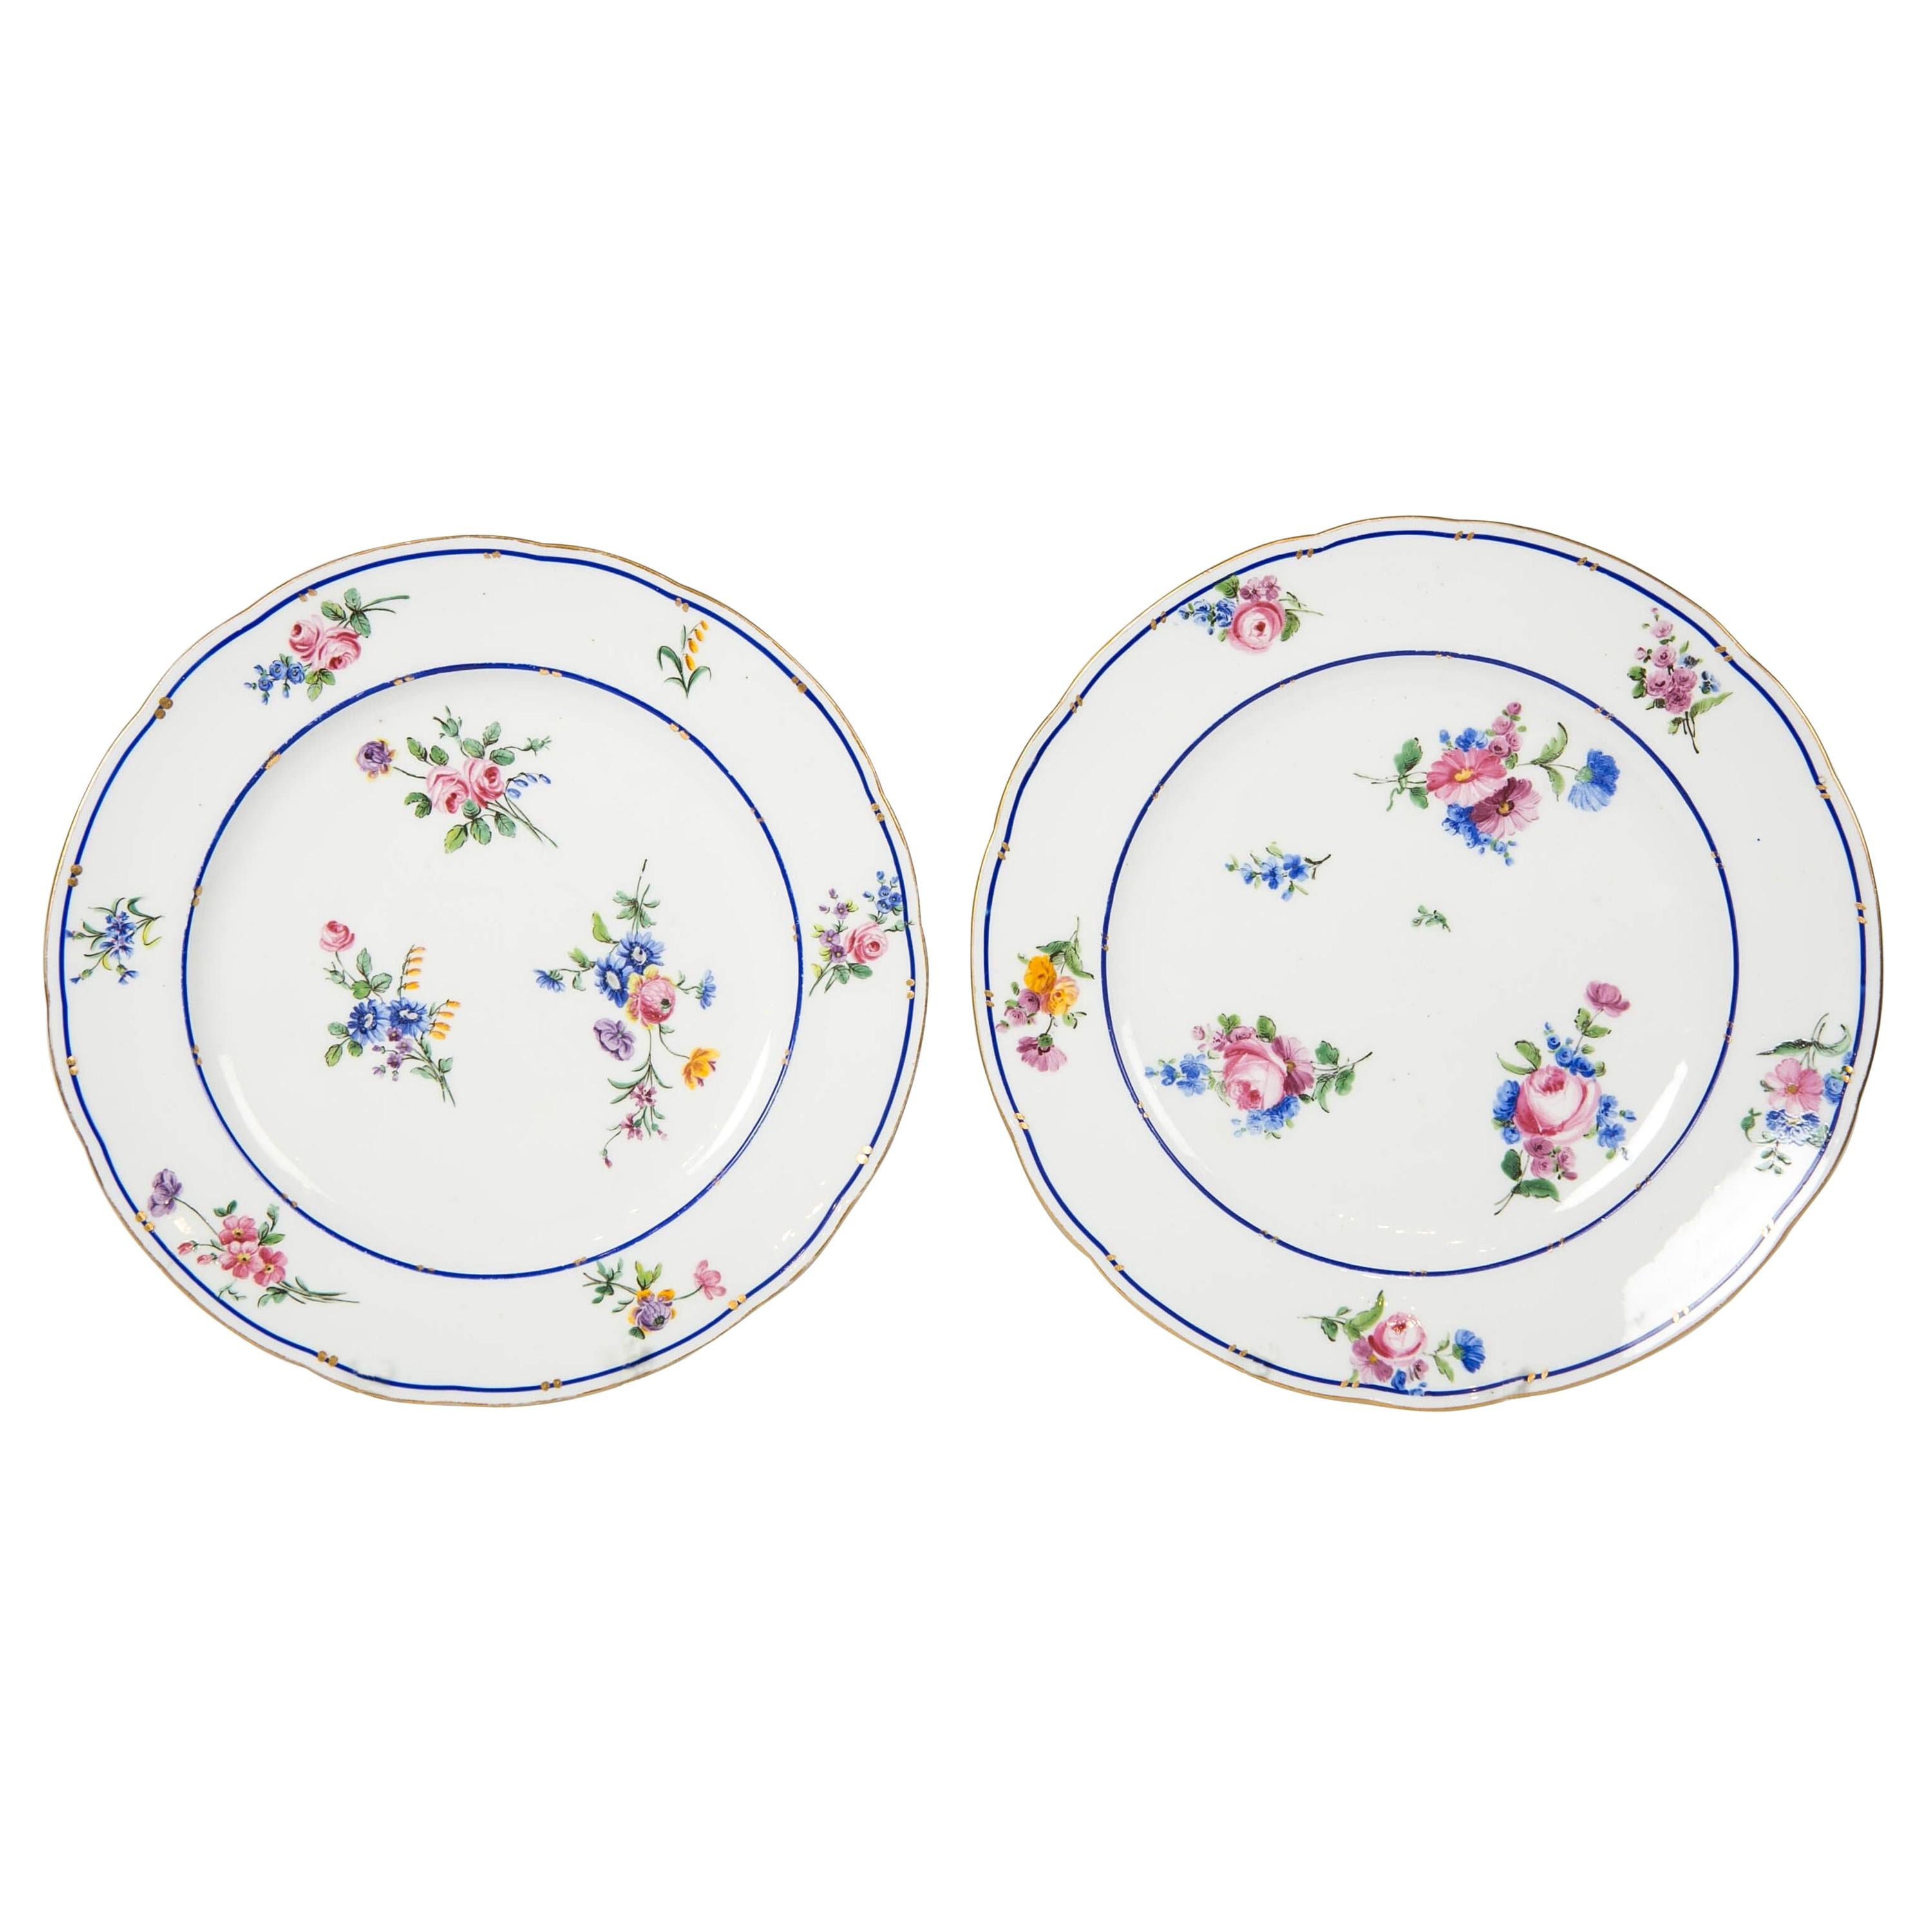 Pair of Sèvres Porcelain Dishes Painted with Delicate Flowers Made France